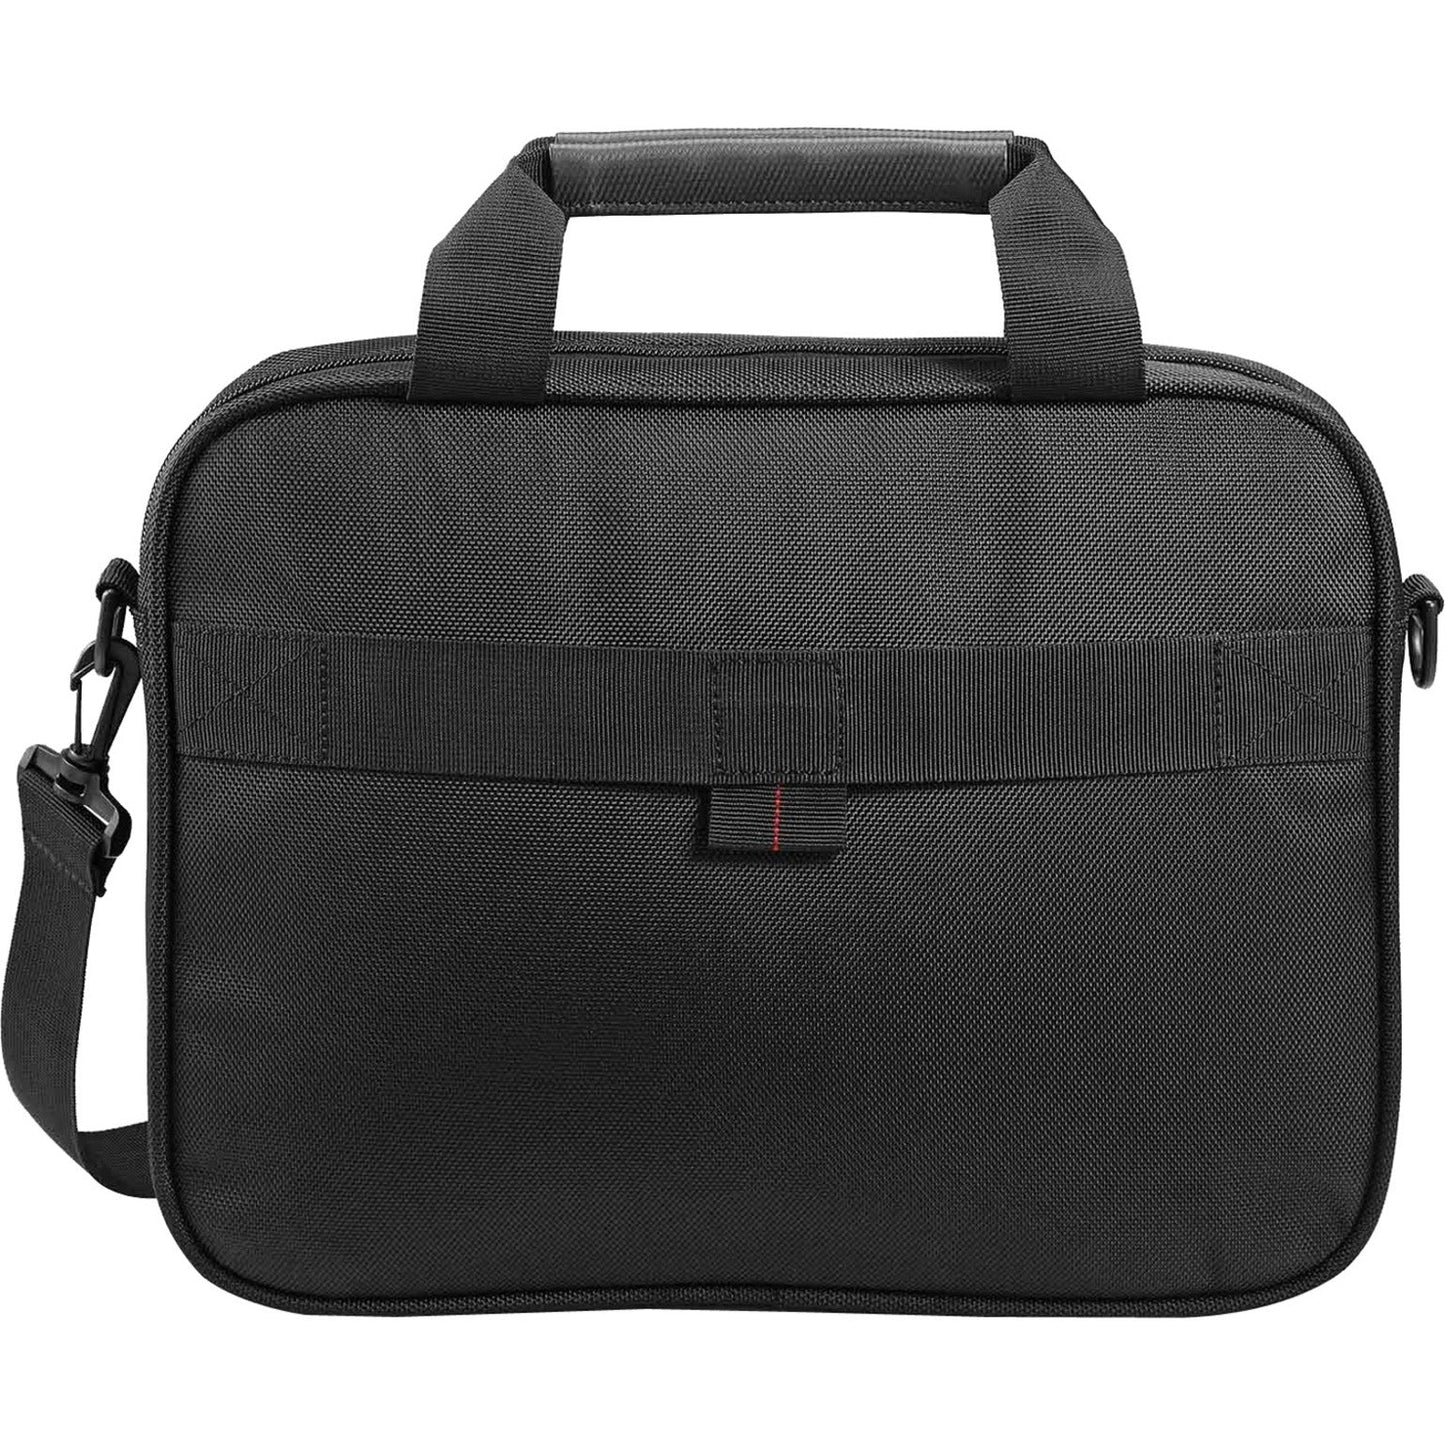 Samsonite Xenon 3.0 Carrying Case (Briefcase) for 12" to 13.9" Apple Notebook - Black